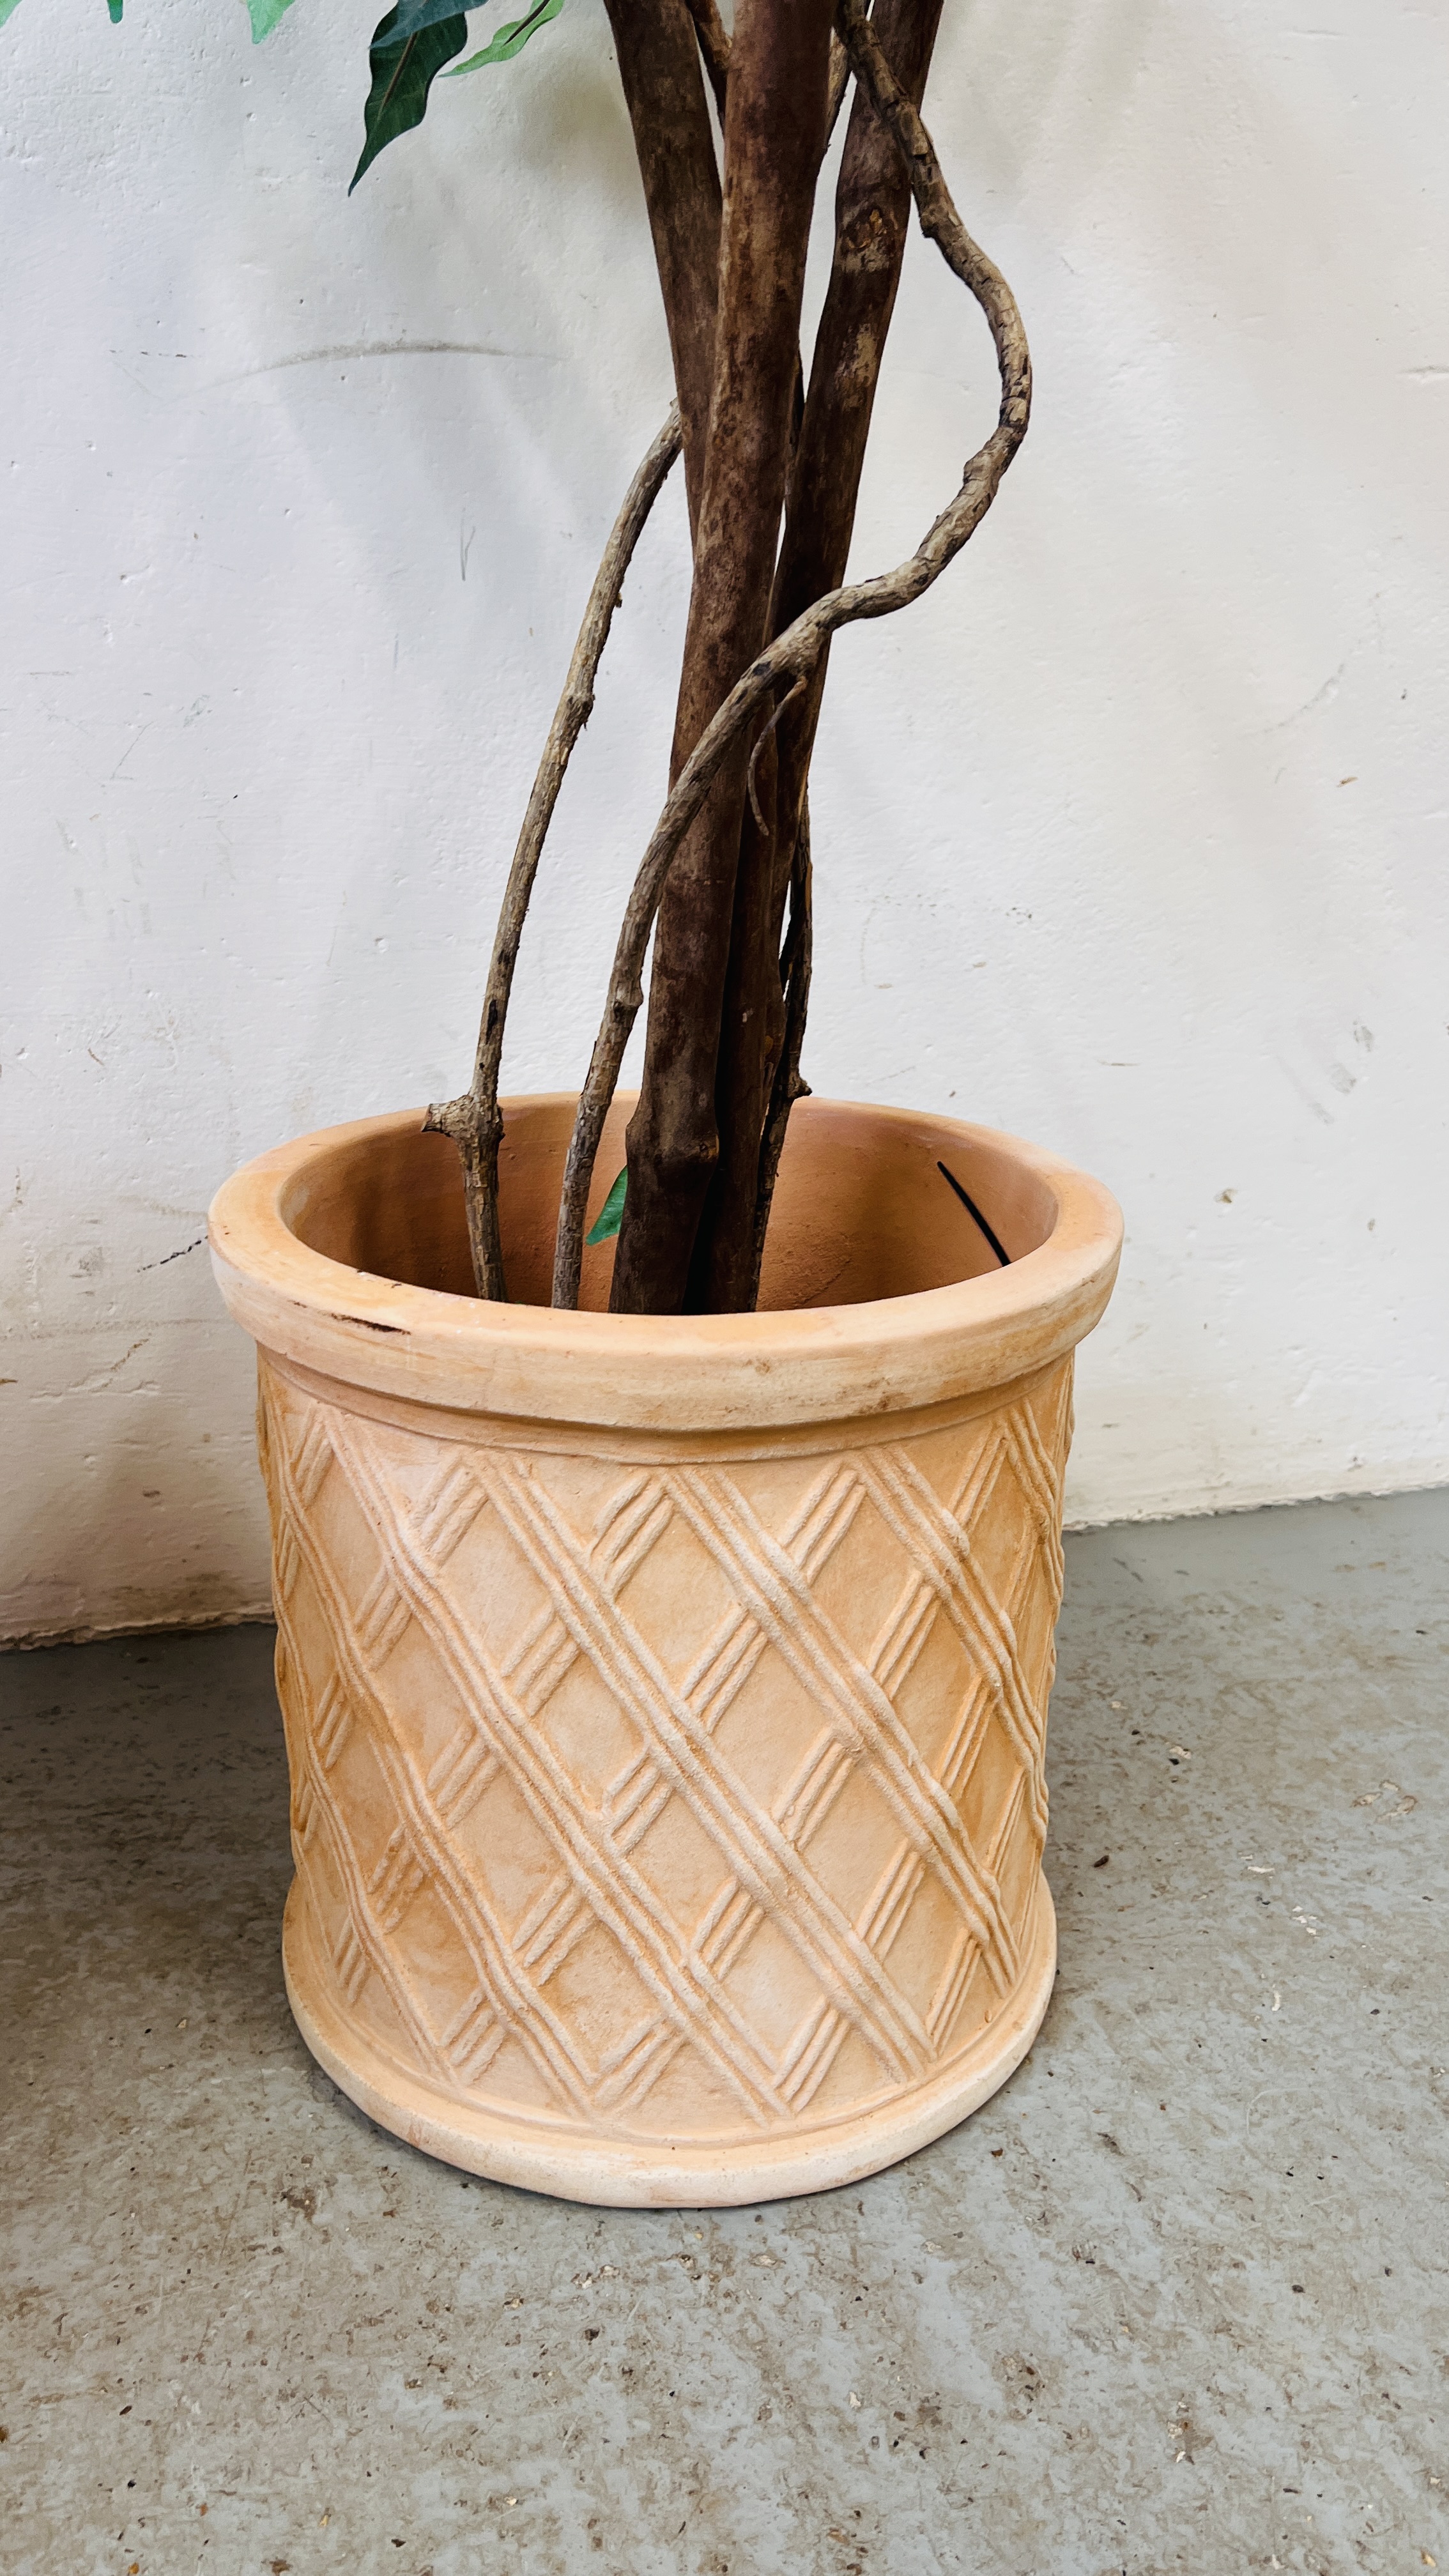 2 LARGE TERRACOTTA PLANT POTS INCLUDE DAXTON AND ARTIFICIAL TREE (THE LARGEST POT - DIAMETER 36CM) - Image 3 of 4